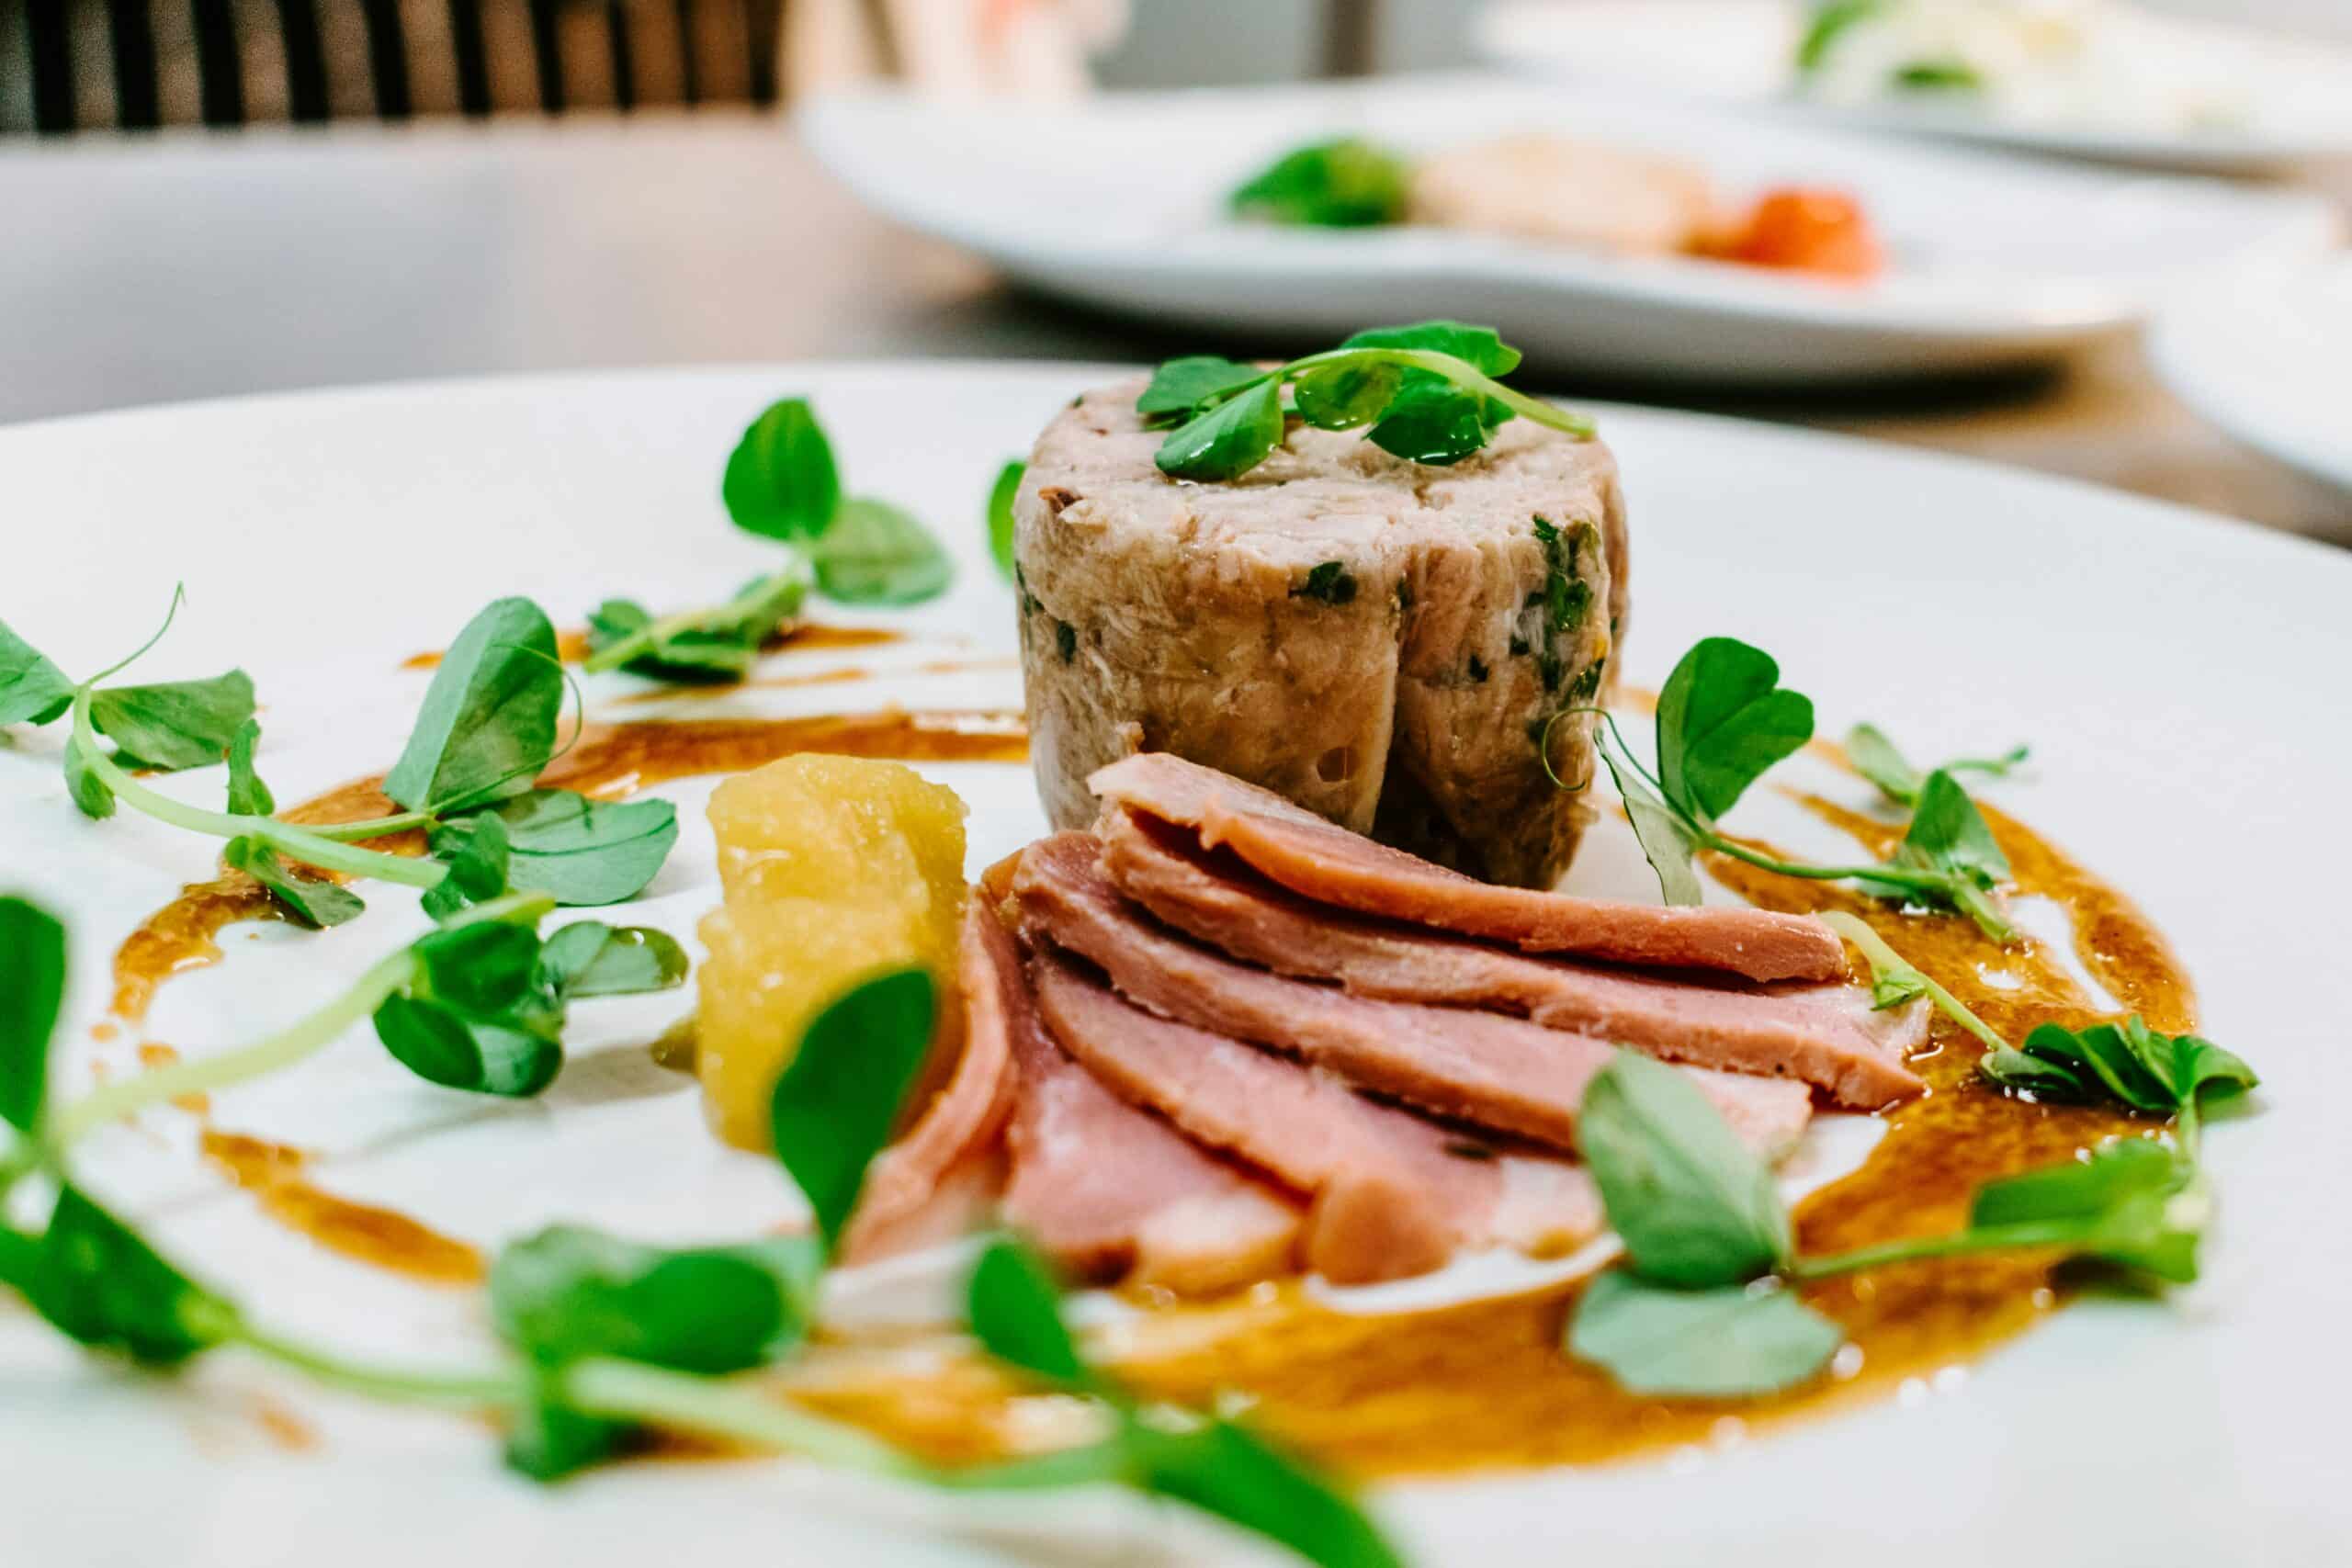 Image title: A focus photograph of cooked meat on a round white plate. Image alt-text: gourmet catering Image URL: https://unsplash.com/photos/selective-focus-photography-of-cooked-meat-on-round-white-plate-7i_YGMy_-Ho 